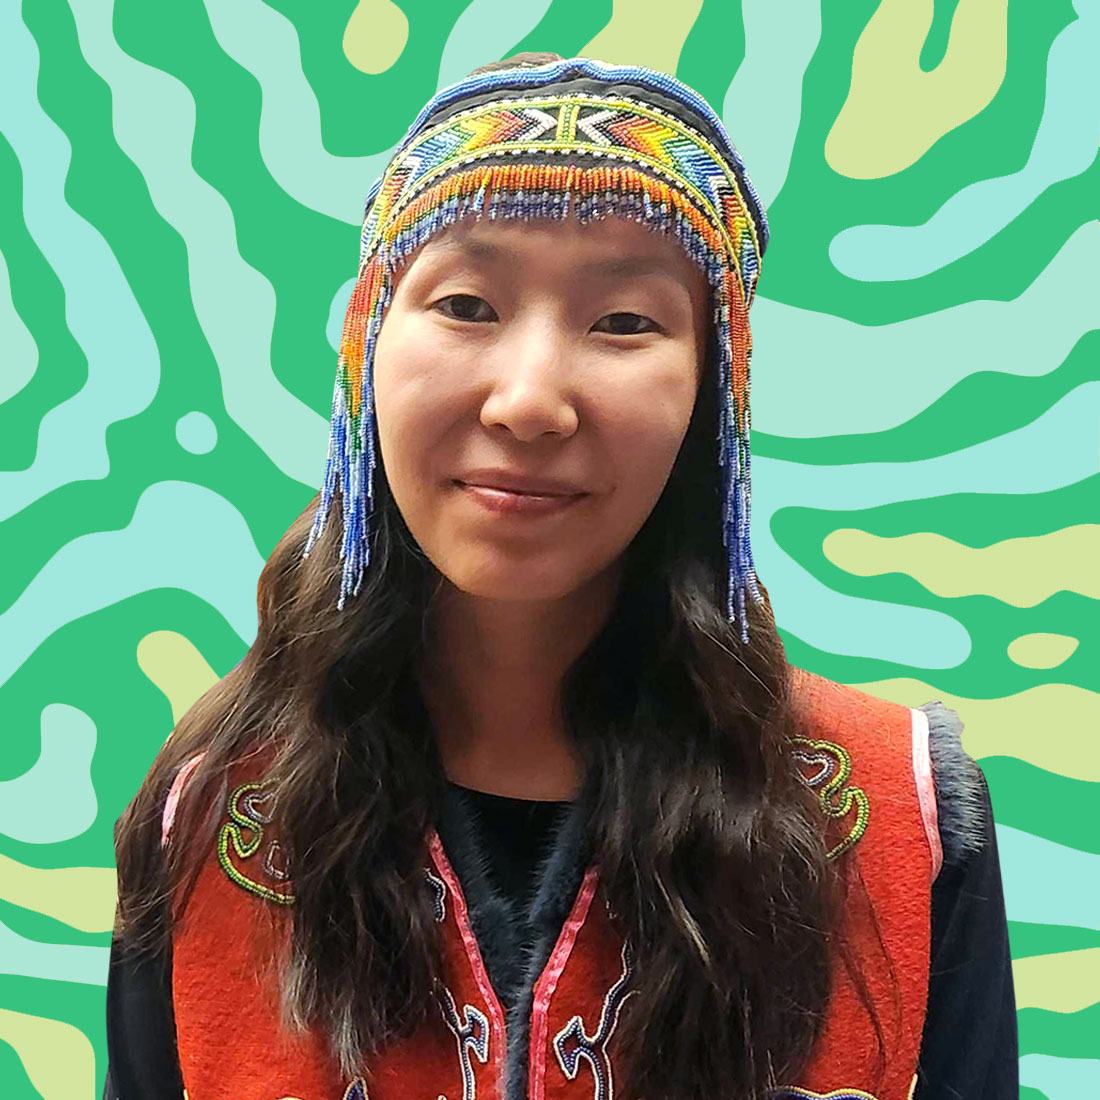 A headshot of a young person with a beaded headdress on a green and yellow striped background